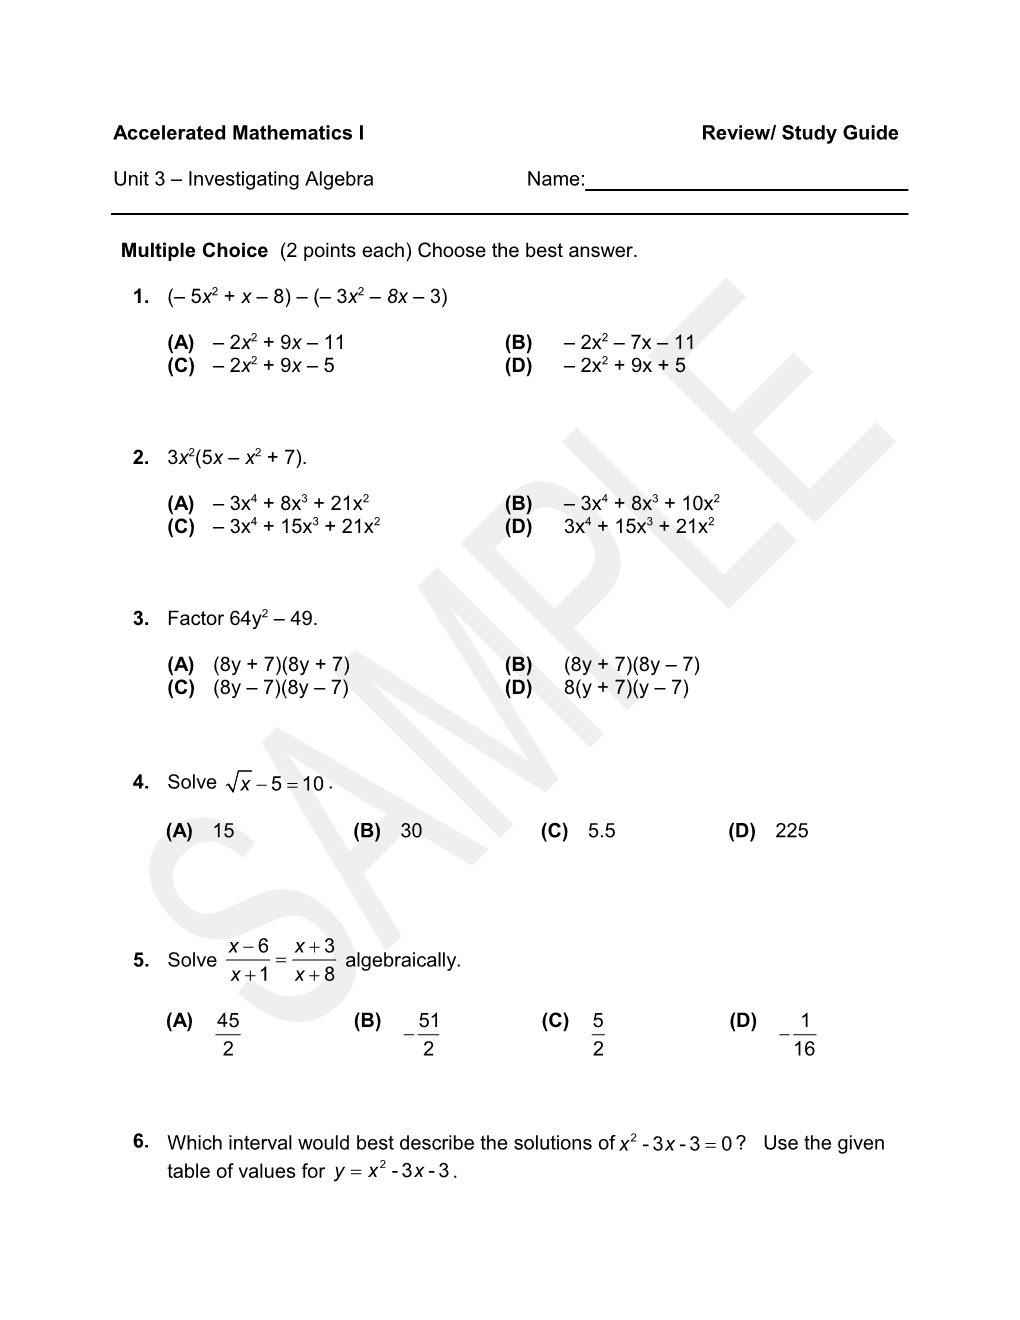 Answer Each Question Showing All Work Algebraically, Graphically, And/Or Verbally to Indicate